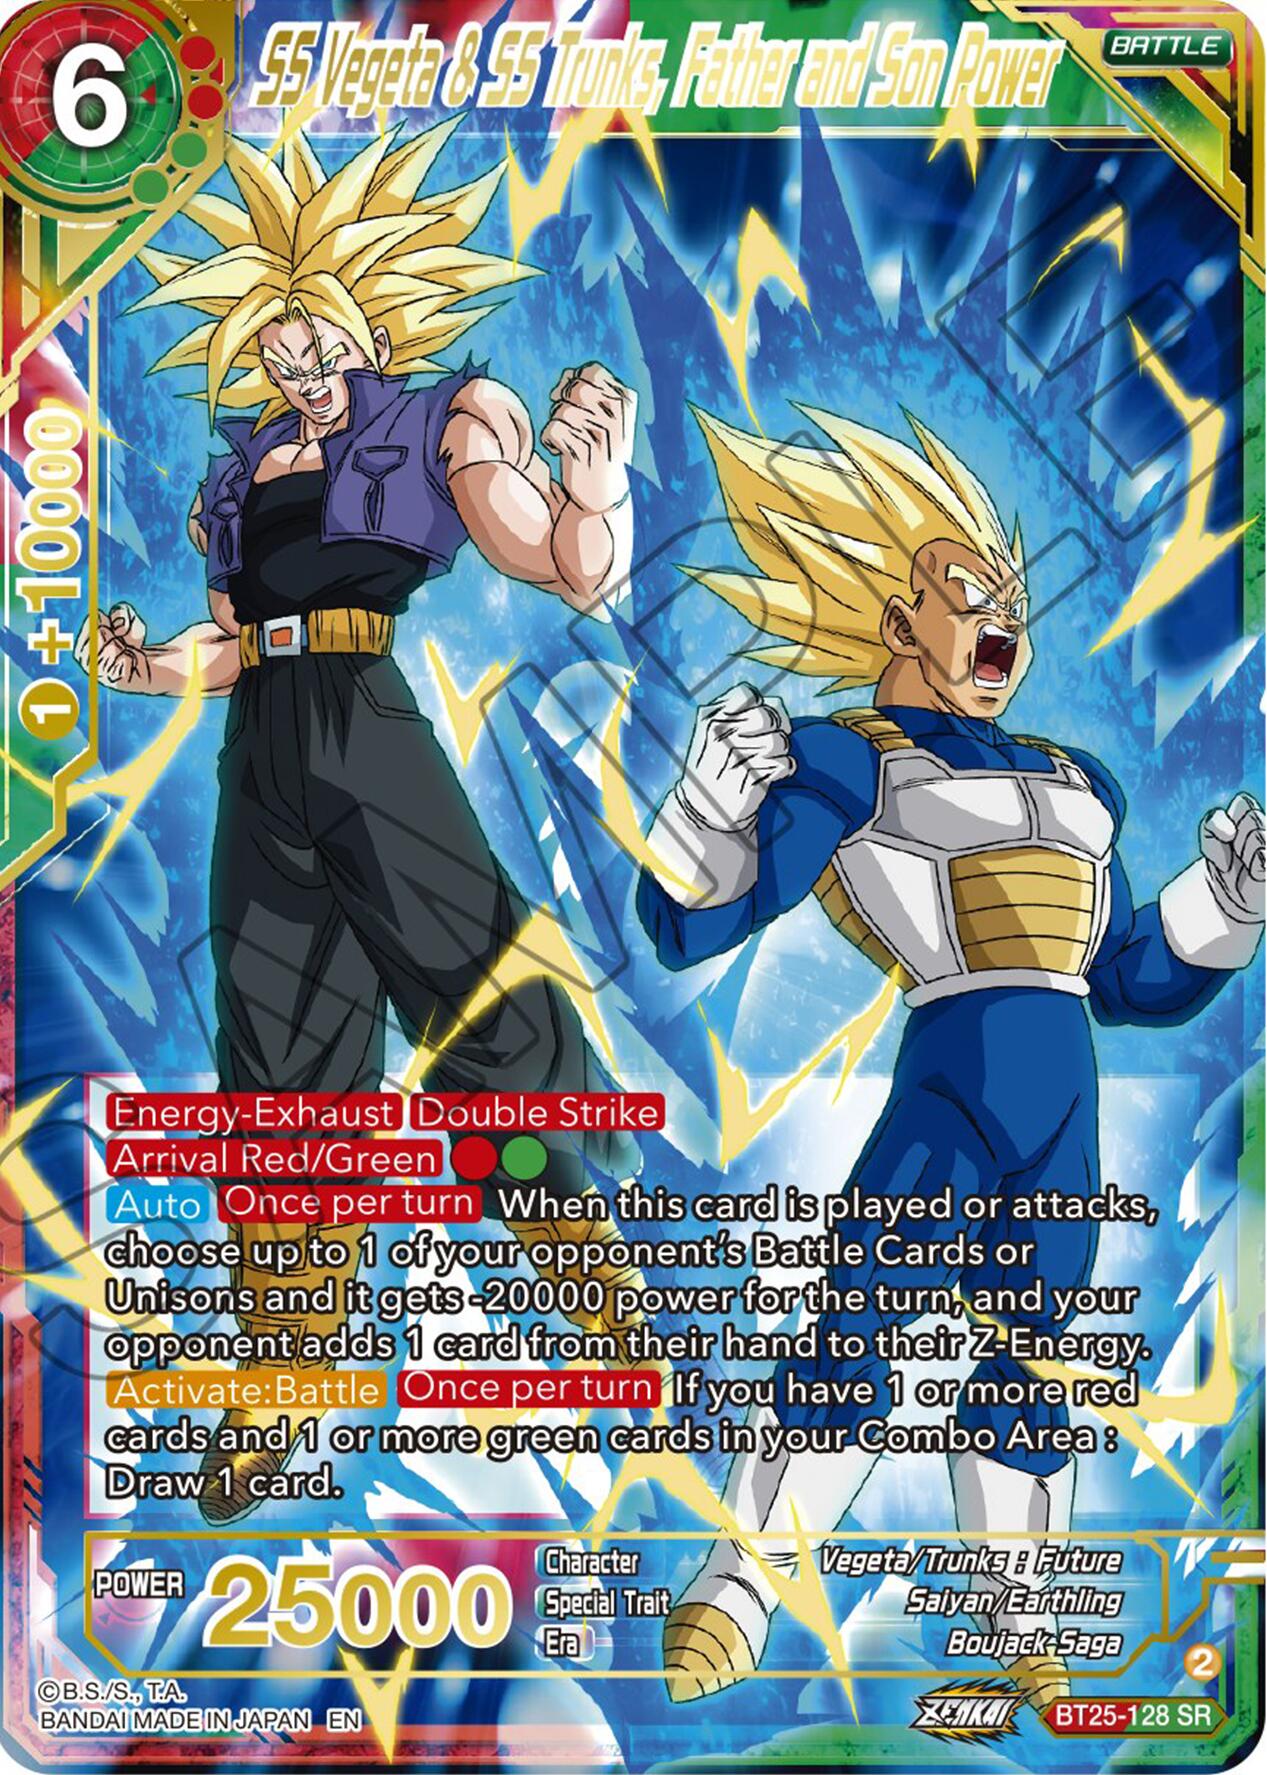 SS Vegeta & SS Trunks, Father and Son Power (BT25-128) [Legend of the Dragon Balls] | North Valley Games